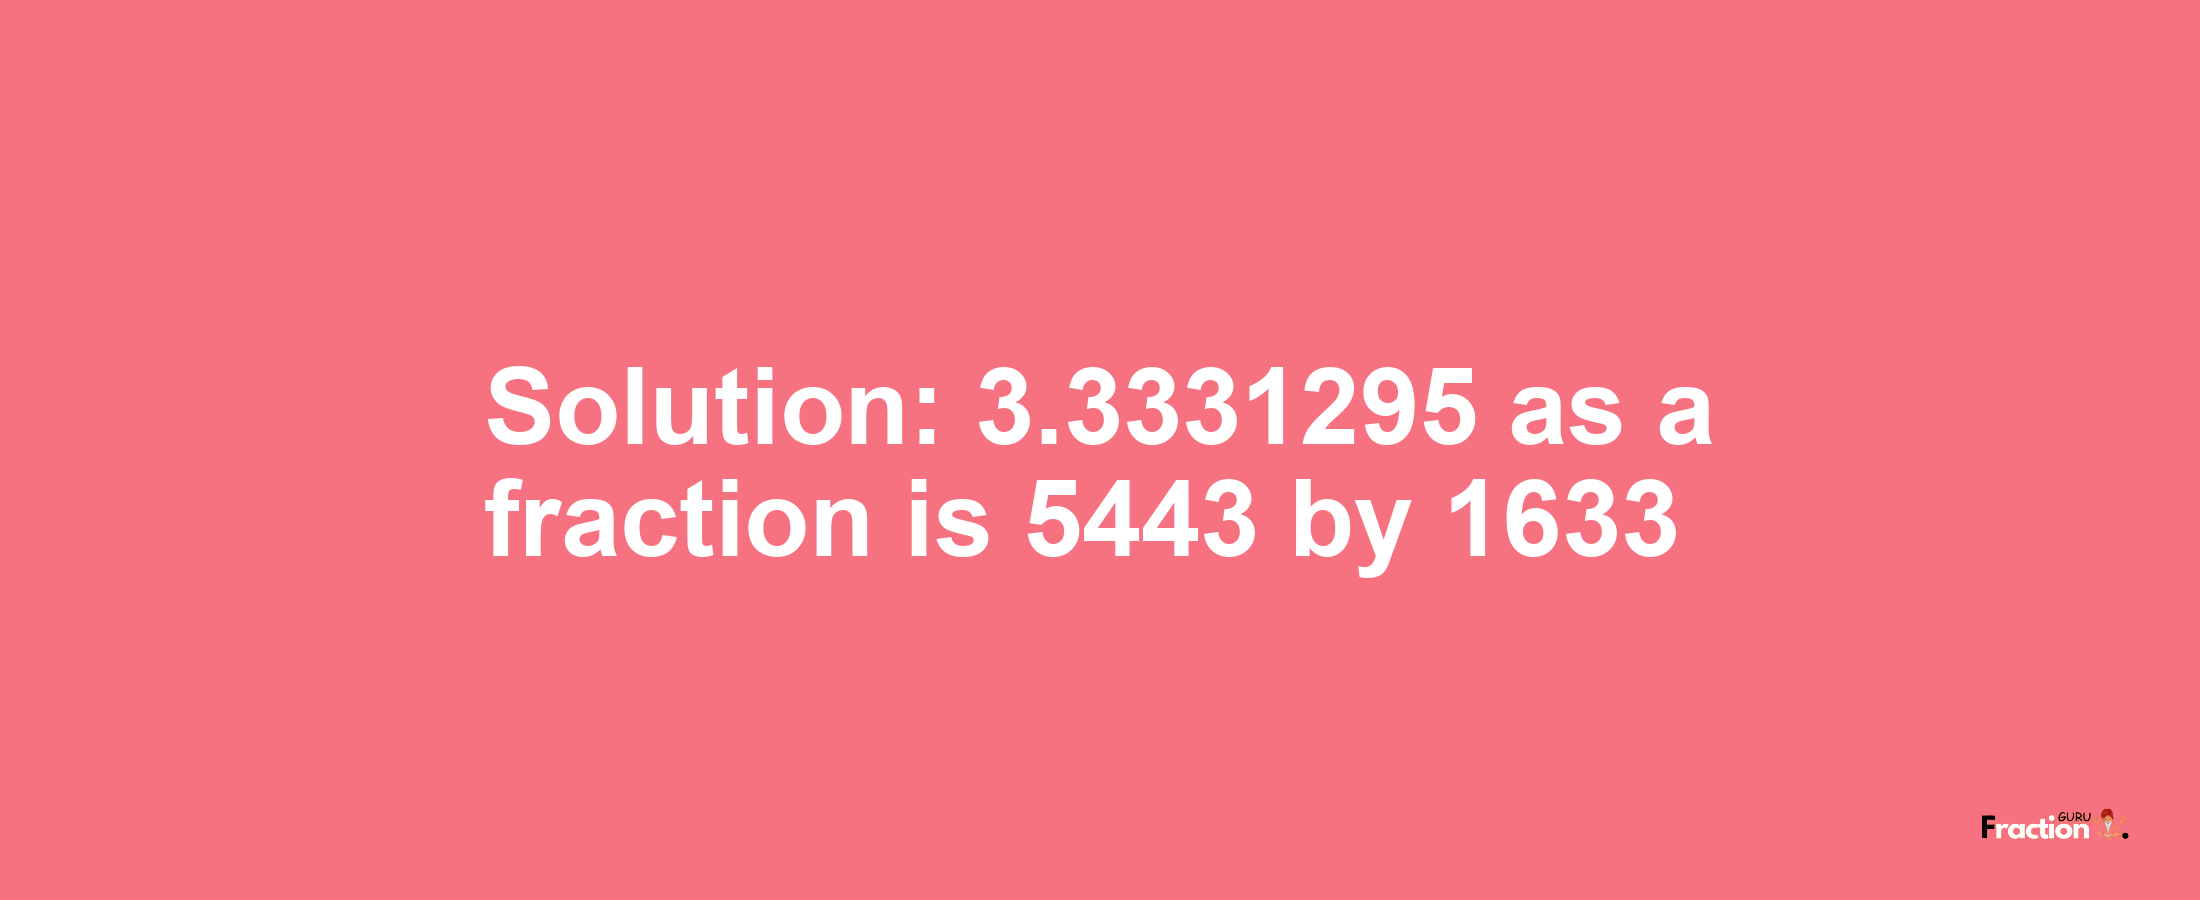 Solution:3.3331295 as a fraction is 5443/1633